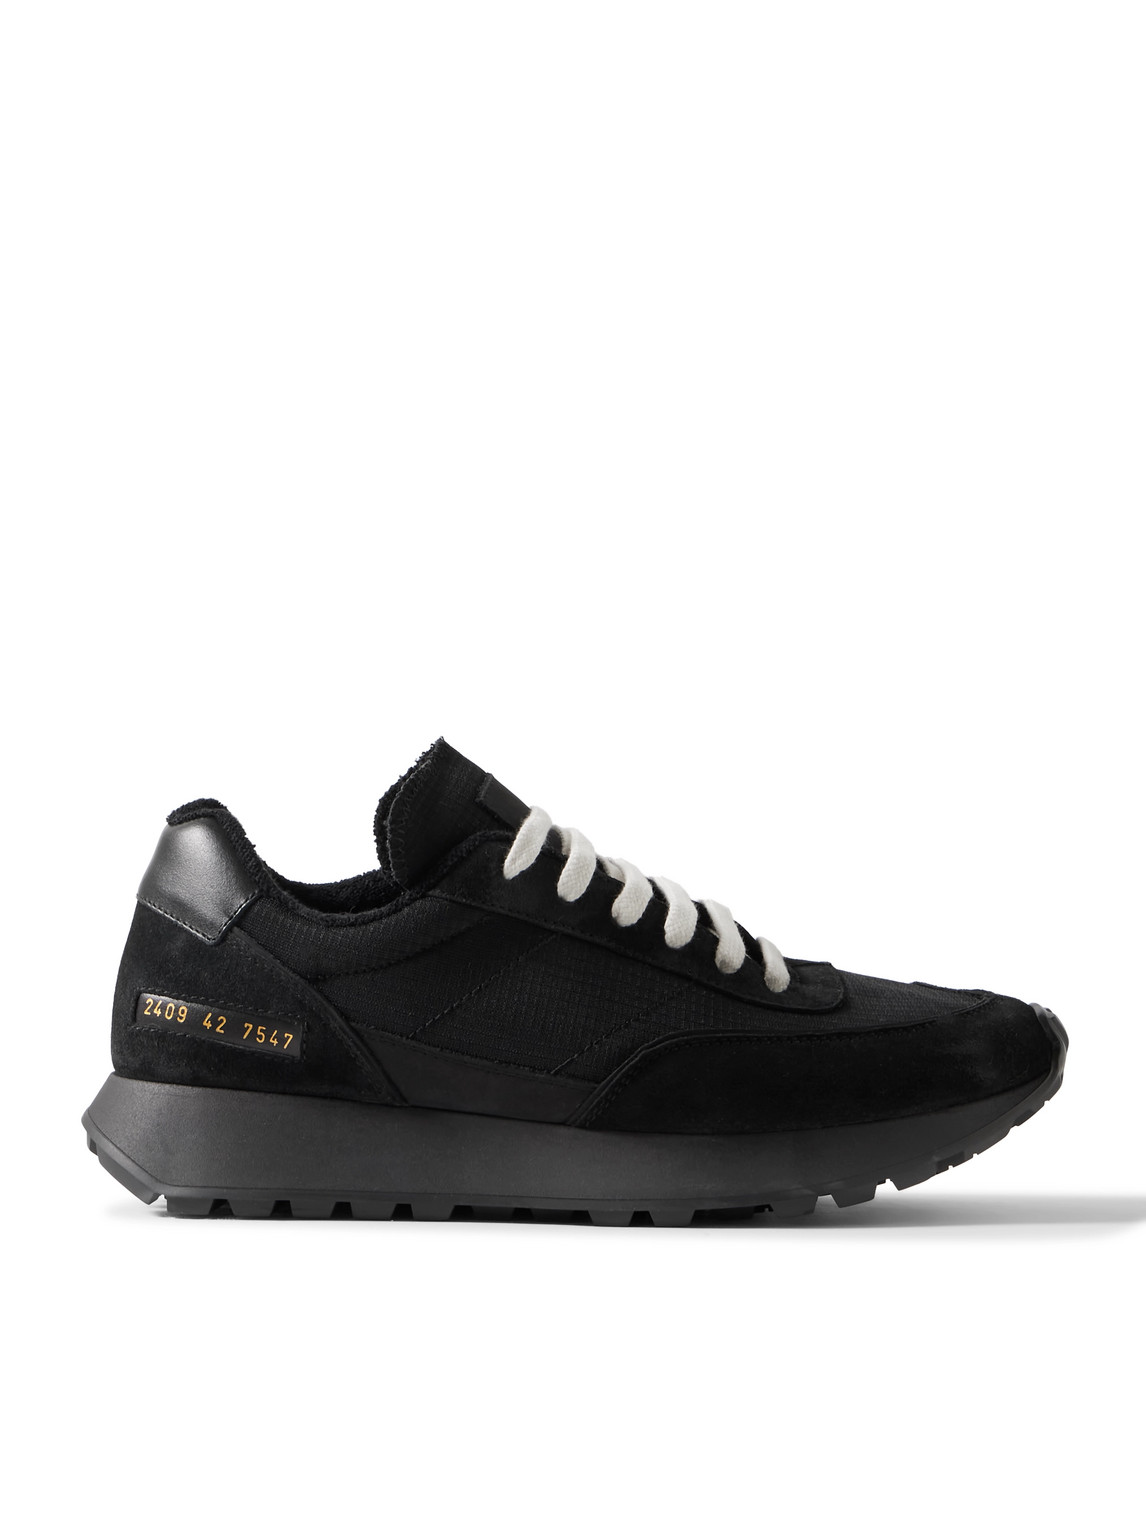 COMMON PROJECTS TRACK CLASSIC LEATHER AND SUEDE-TRIMMED RIPSTOP SNEAKERS